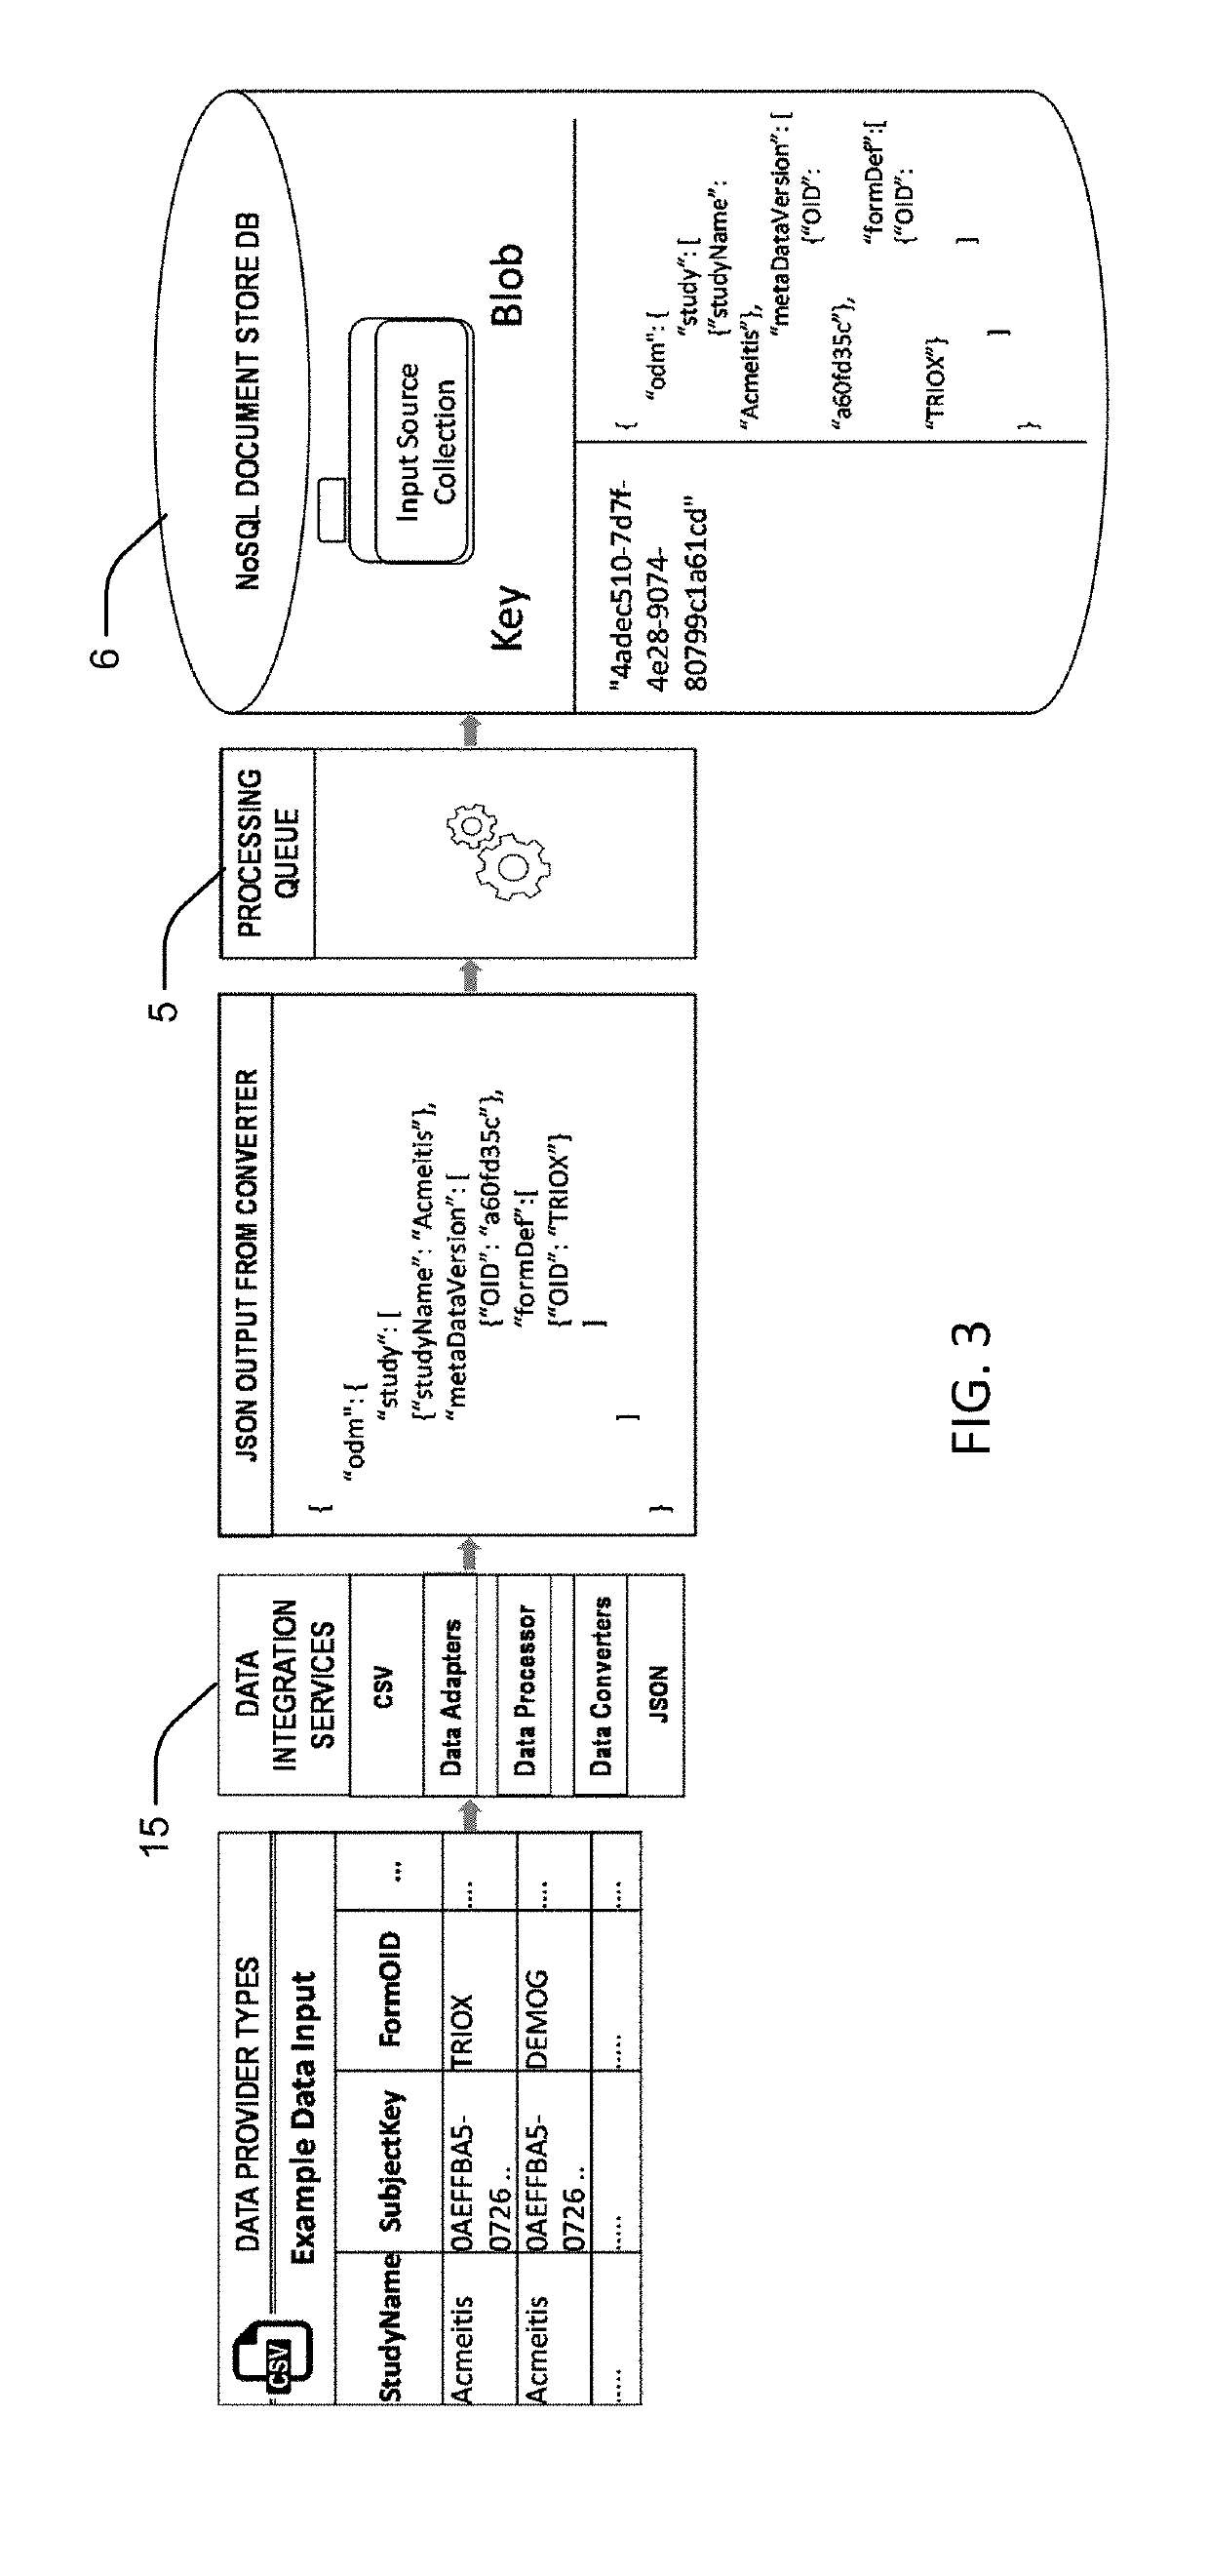 Systems and methods for managing clinical research